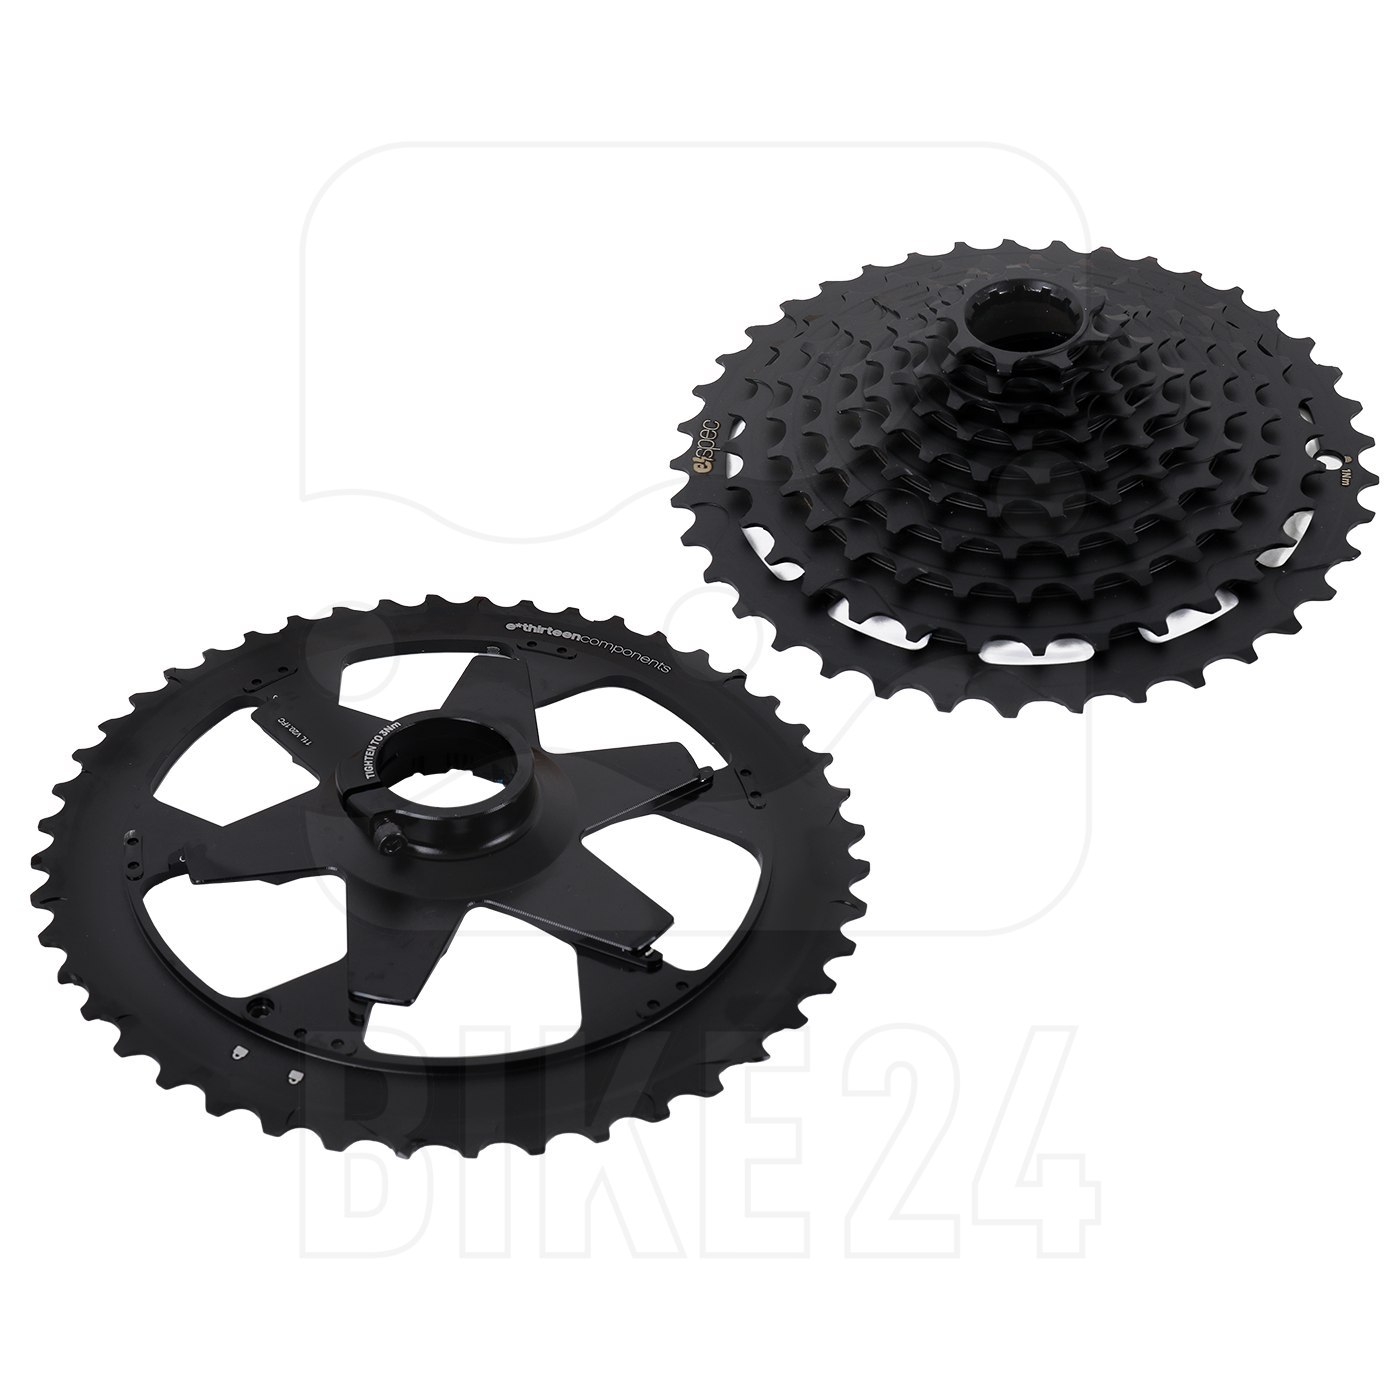 Picture of e*thirteen TRS Plus Cassette 11-speed for SRAM XD Freehub Bodies - 9-46 Teeth - black